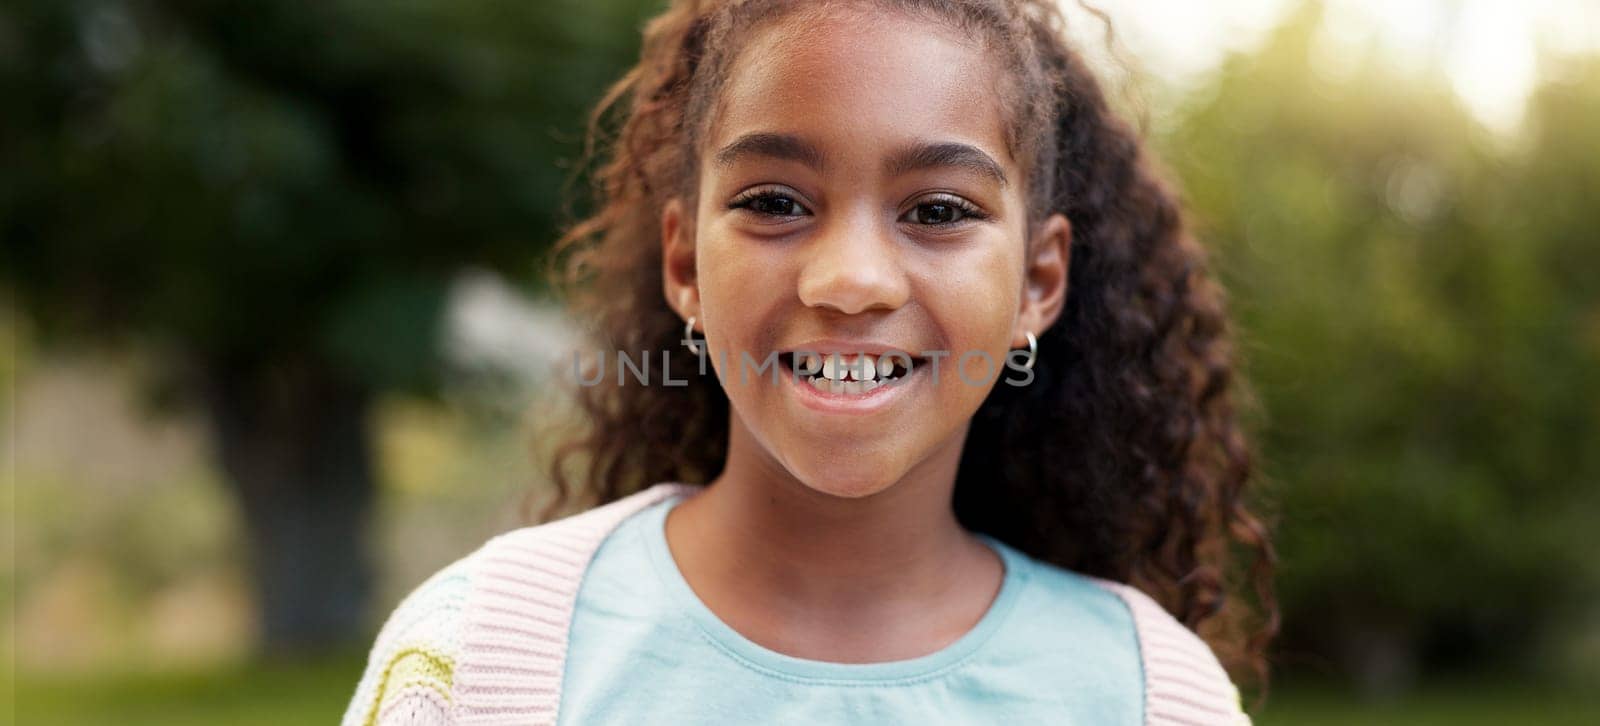 Face, child or girl laughing outdoor in a garden, park or green environment for fun and happiness. Portrait of a young African female kid with a positive mindset, cute smile and nature to relax.